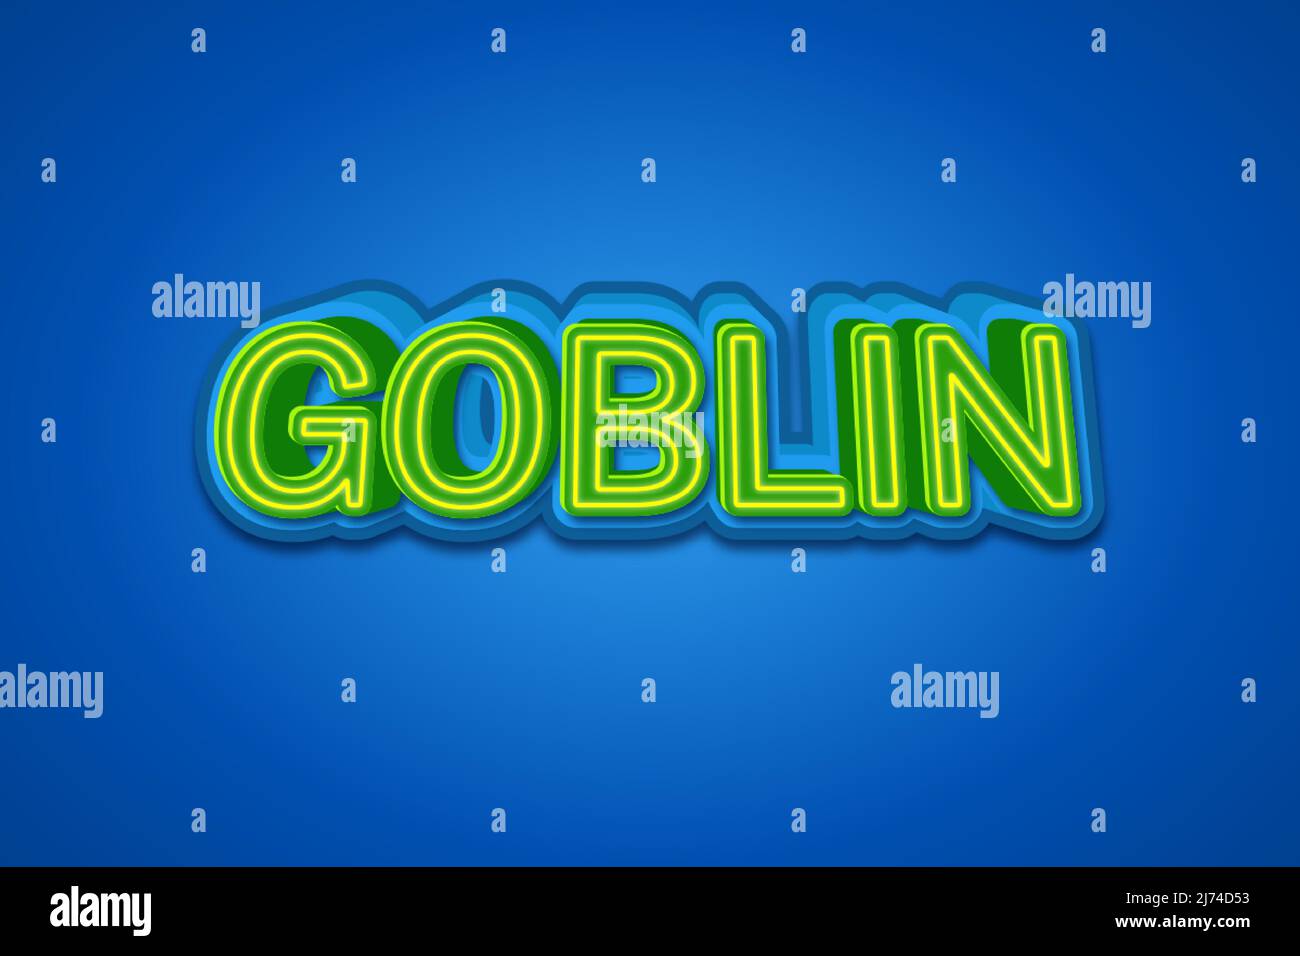 Editable text effects Goblin , words and font can be changed Stock Vector